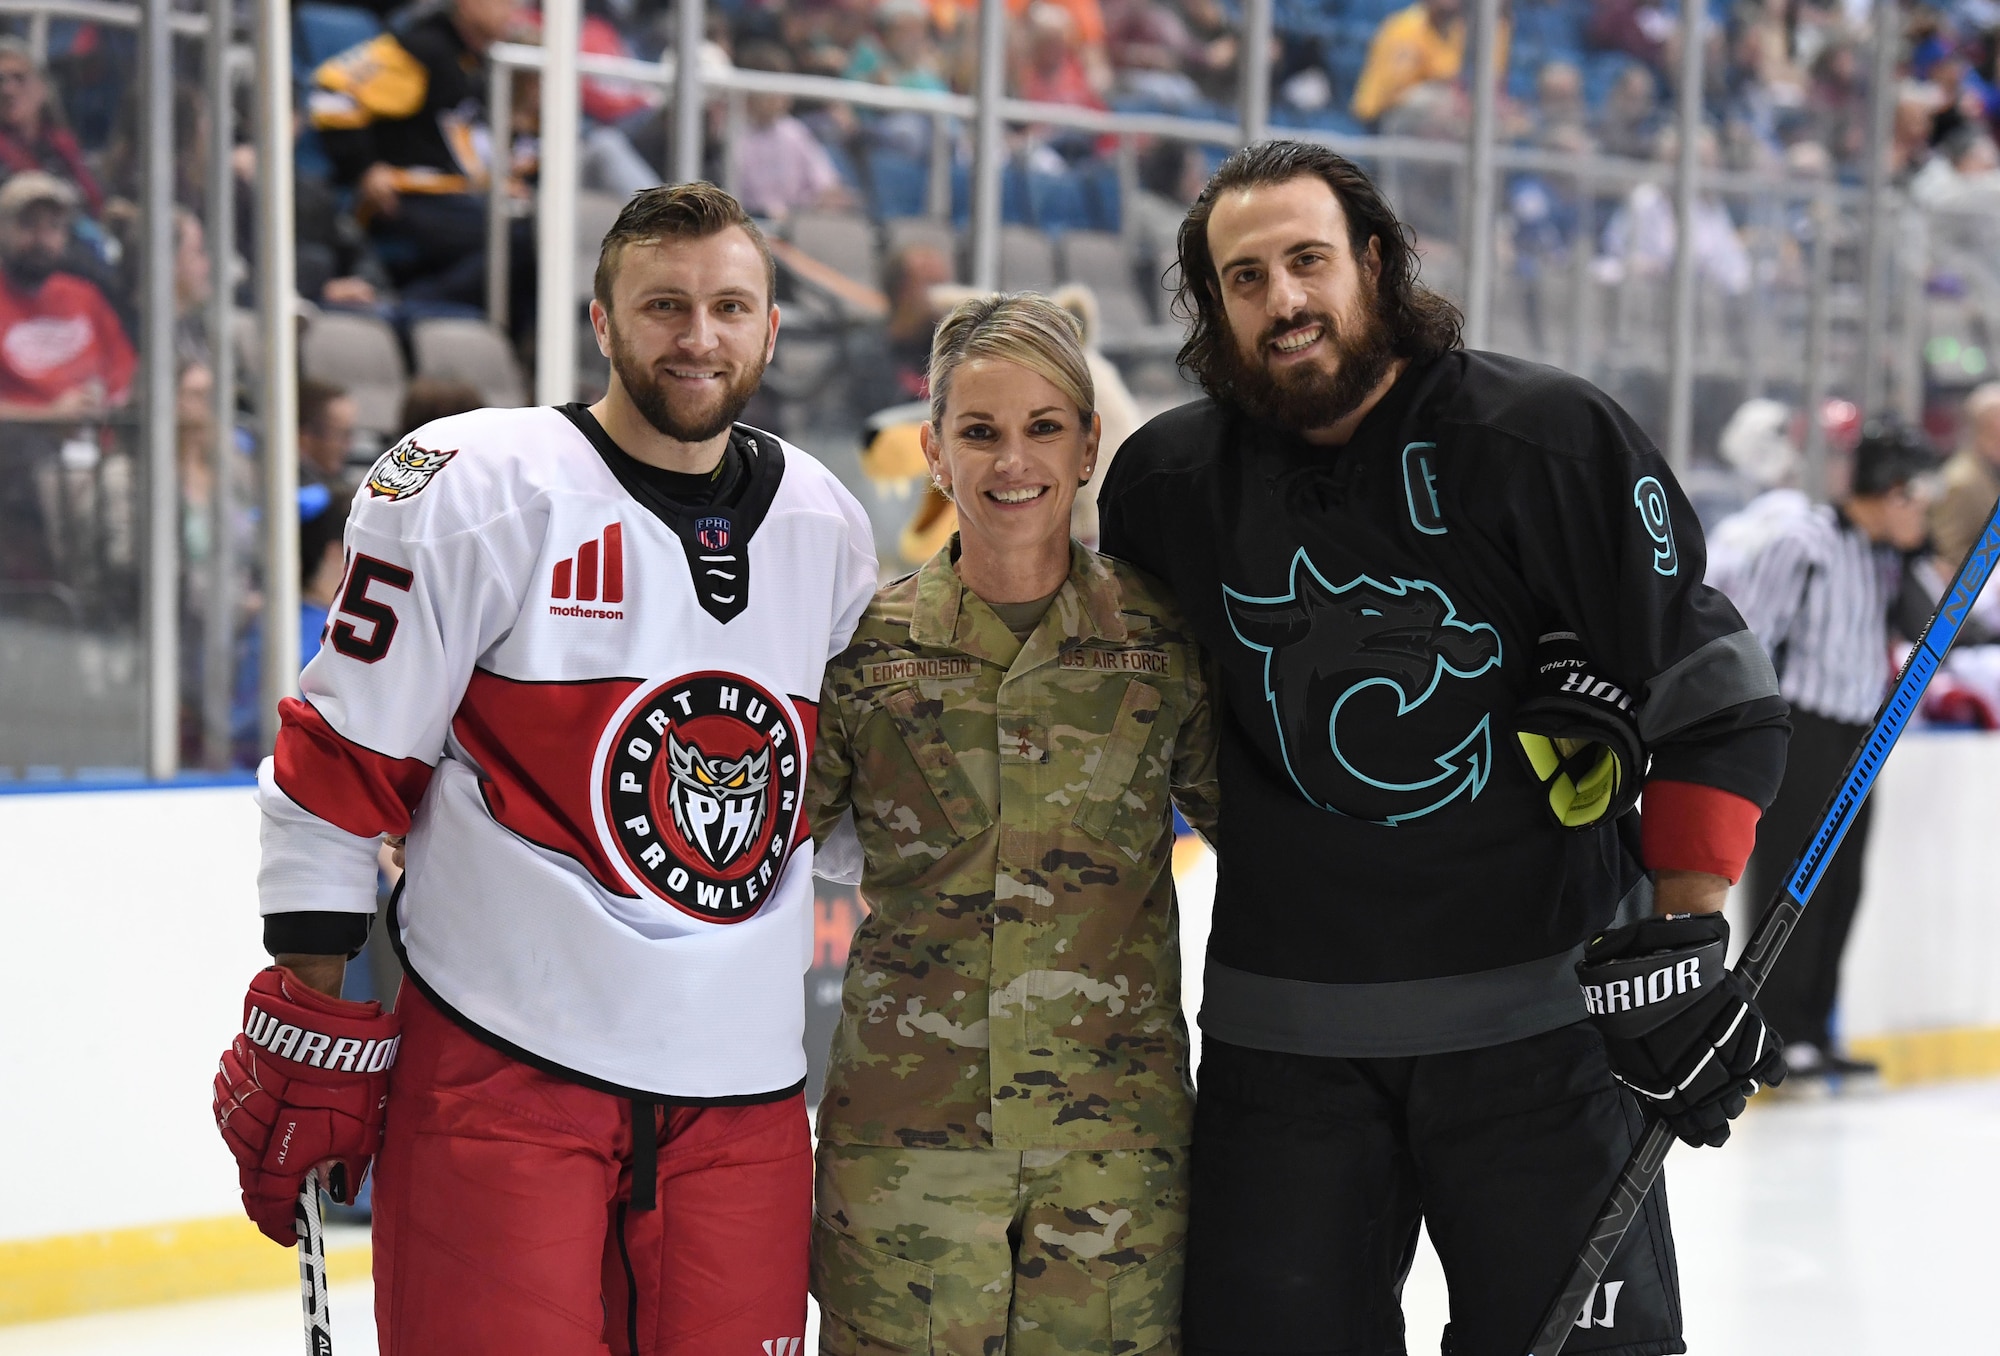 U.S. Air Force Maj. Gen. Michele Edmondson, Second Air Force commander, poses for a photo with the team captains following the ceremonial puck drop during the Biloxi Pro Hockey game inside the Mississippi Coast Coliseum at Biloxi, Mississippi, Dec. 2, 2021. The Keesler Air Force Base Honor Guard and 81st Training Wing leadership also participated in pre-game festivities. (U.S. Air Force photo by Kemberly Groue)